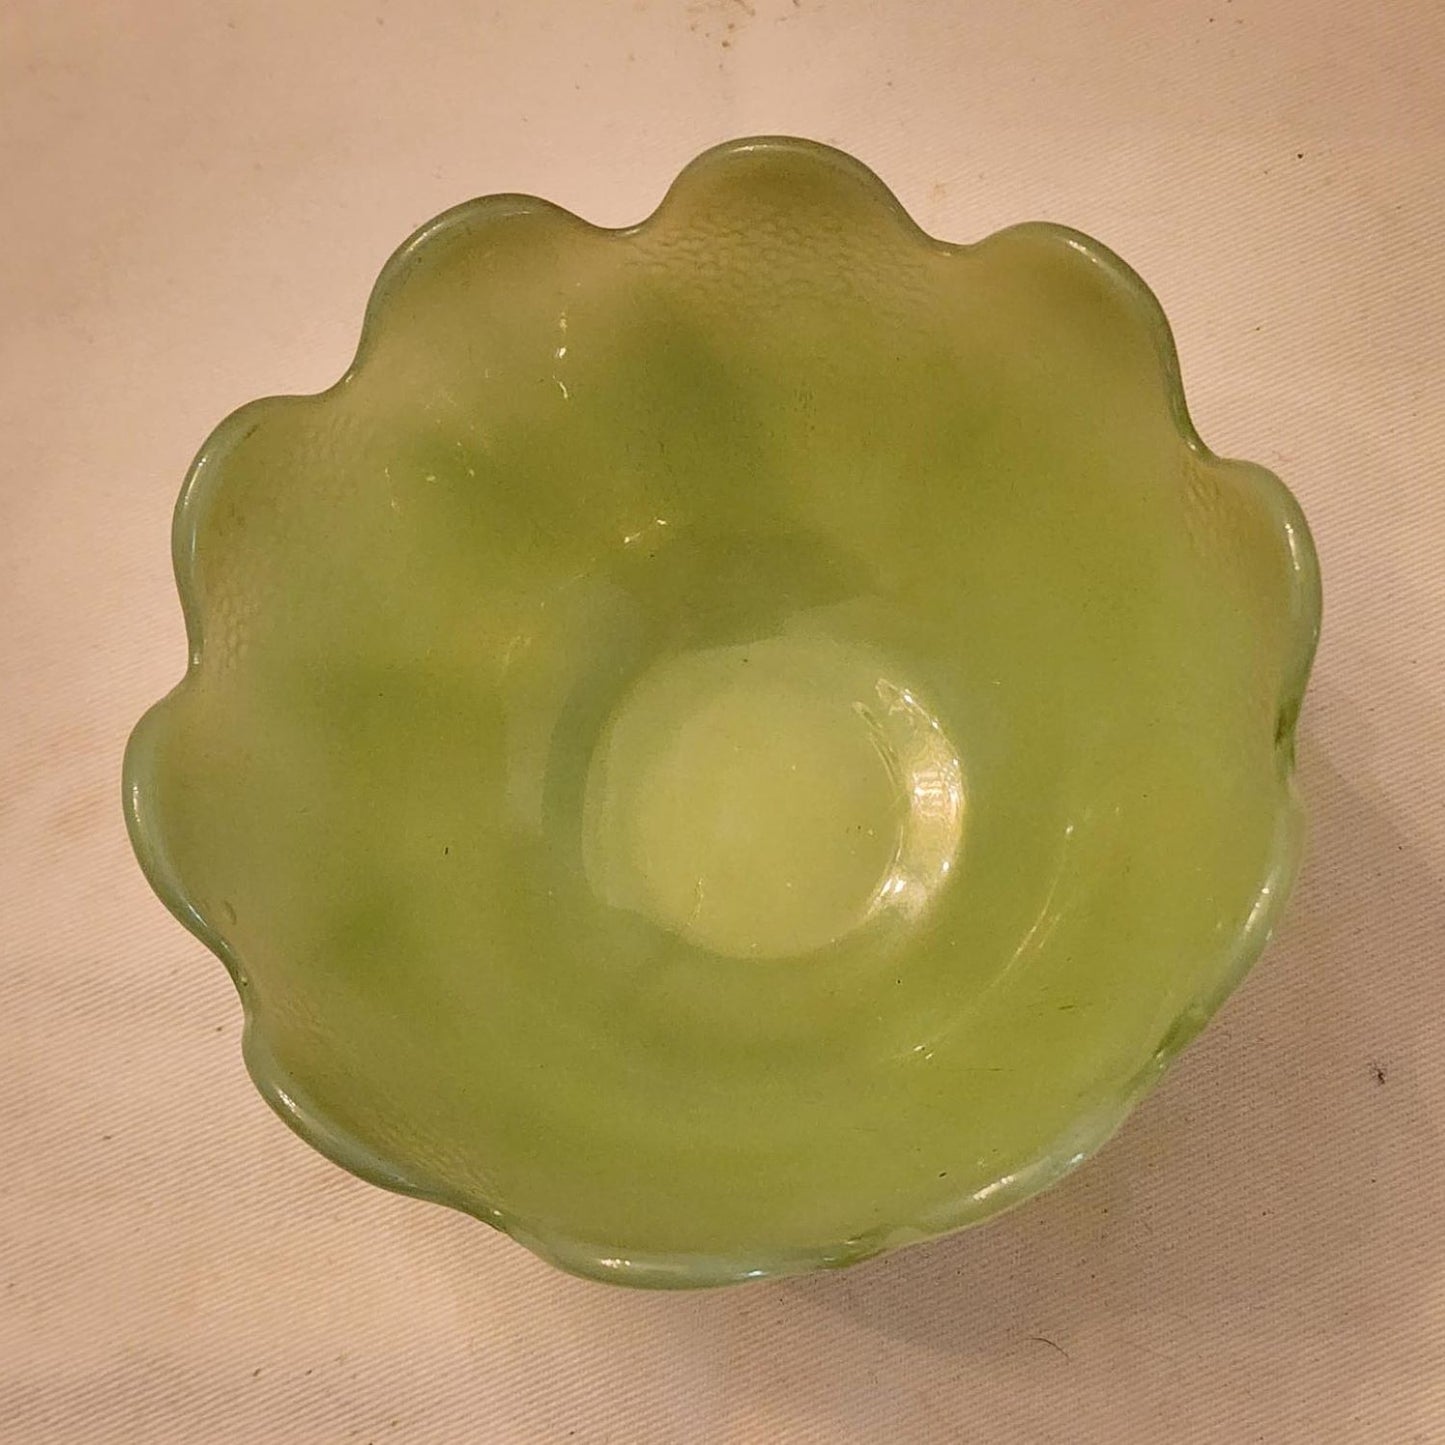 Jadeite Blossom Bowl - "Lotus" pattern - Fire King by Anchor Hocking